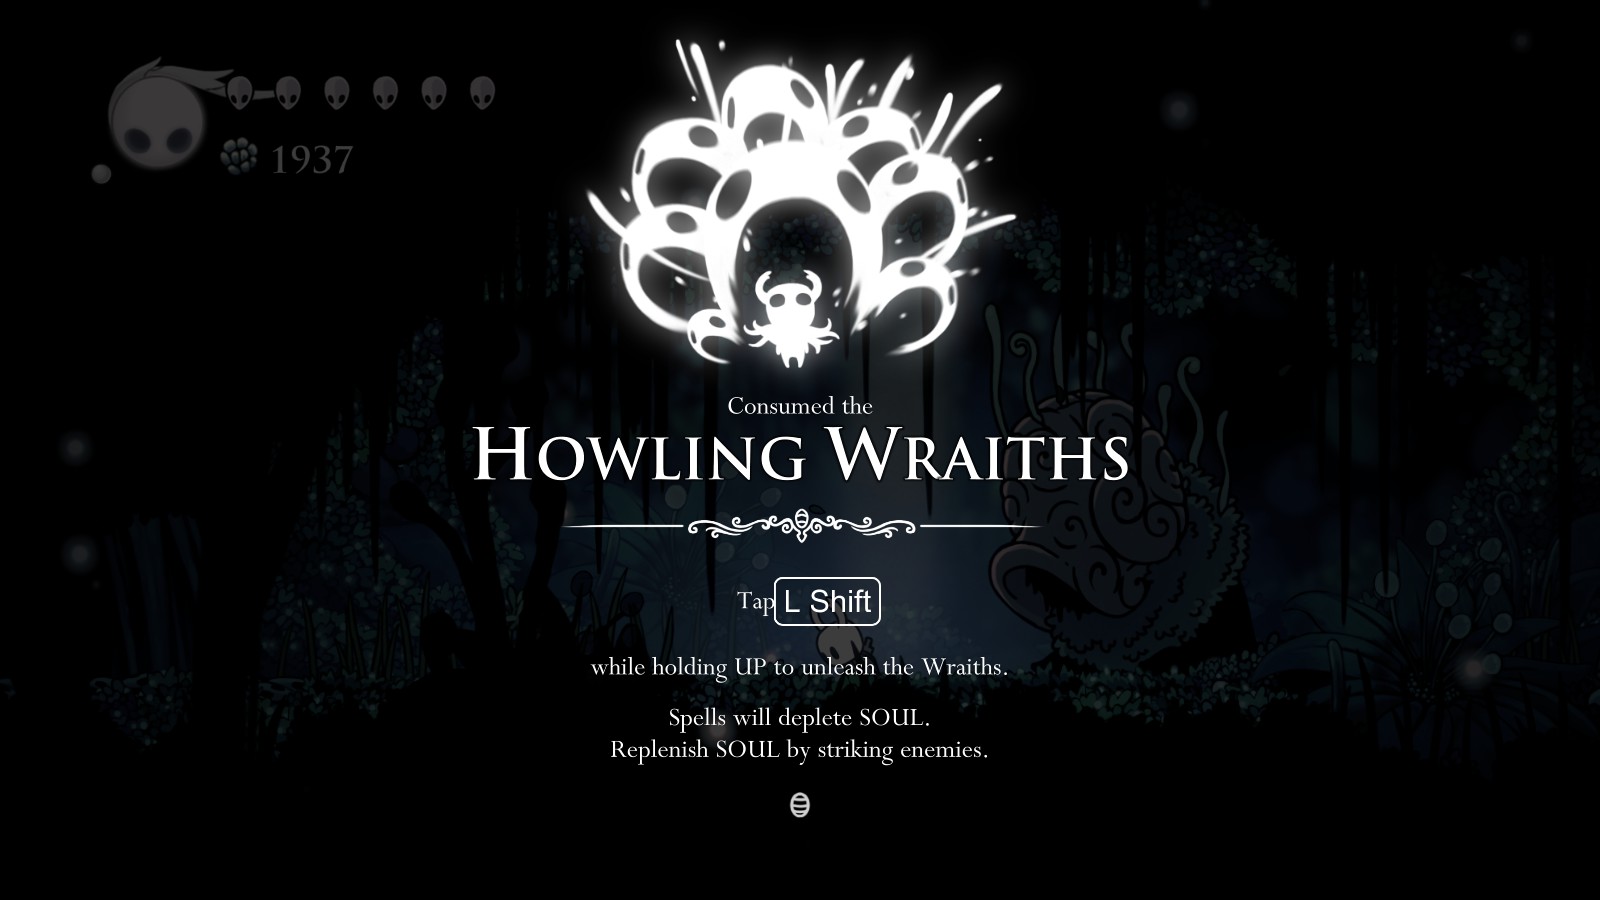 Howling Wraiths - Reward for beating Squit enemy gauntlet in Overgrown Moun...